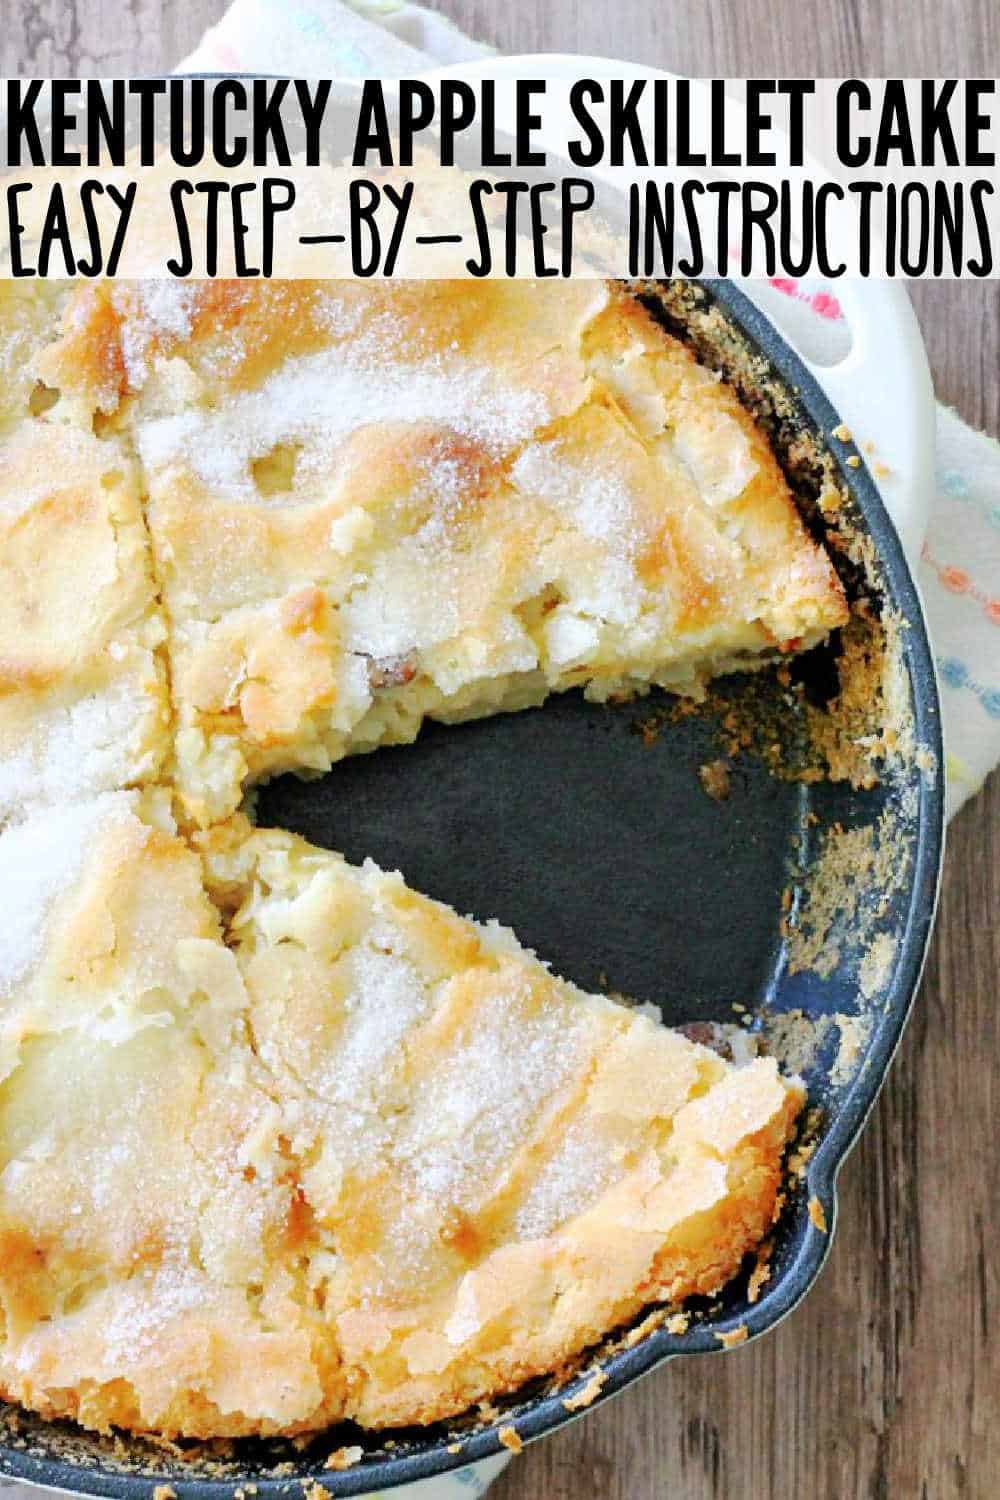 French Apple Cake meets Kentucky Bourbon Country with this simple yet stunning skillet cake. via @foodtasticmom